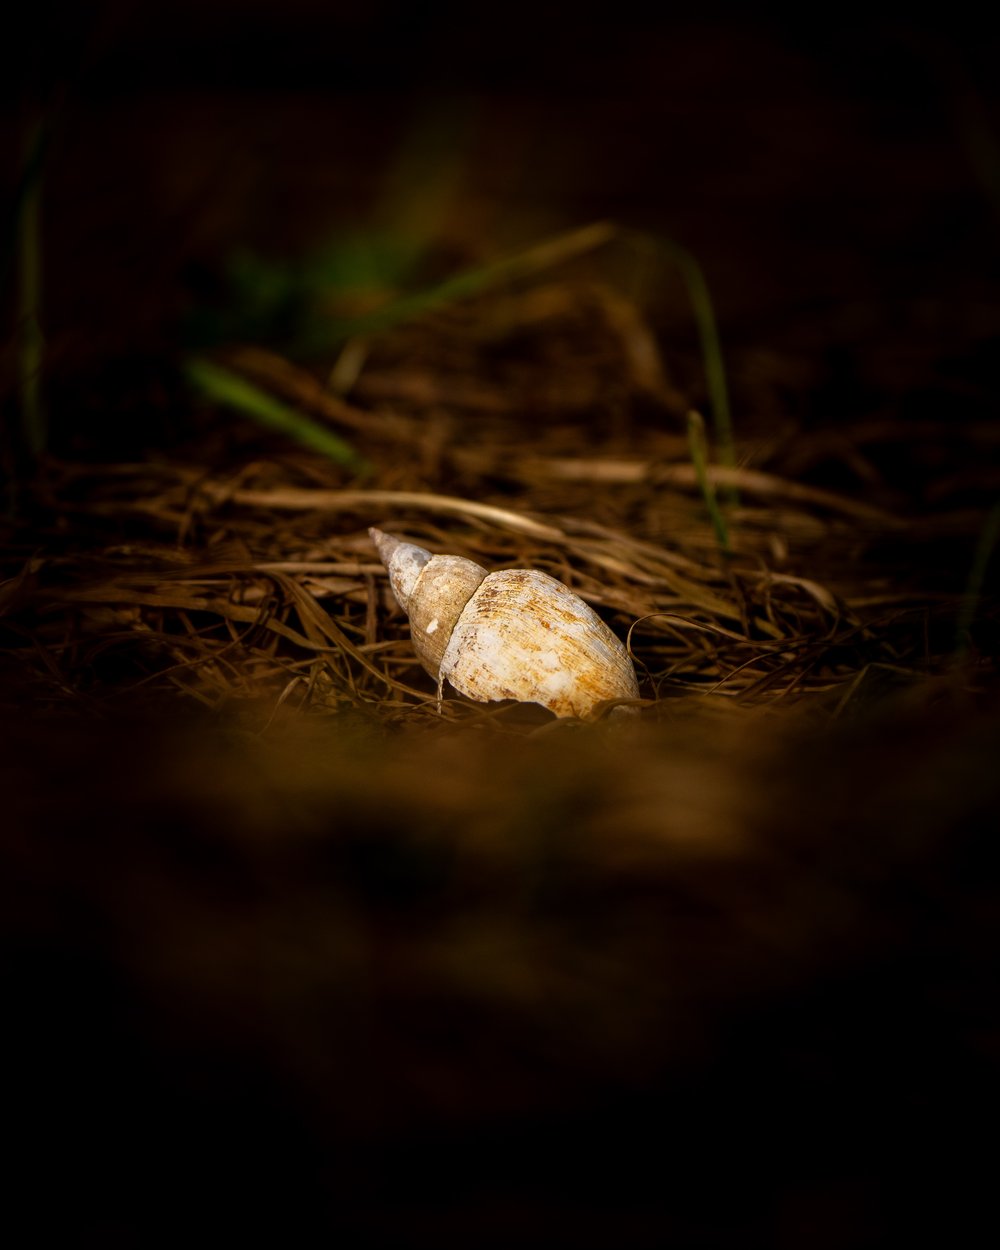 Snail shell (Picture by Medard Sandor)